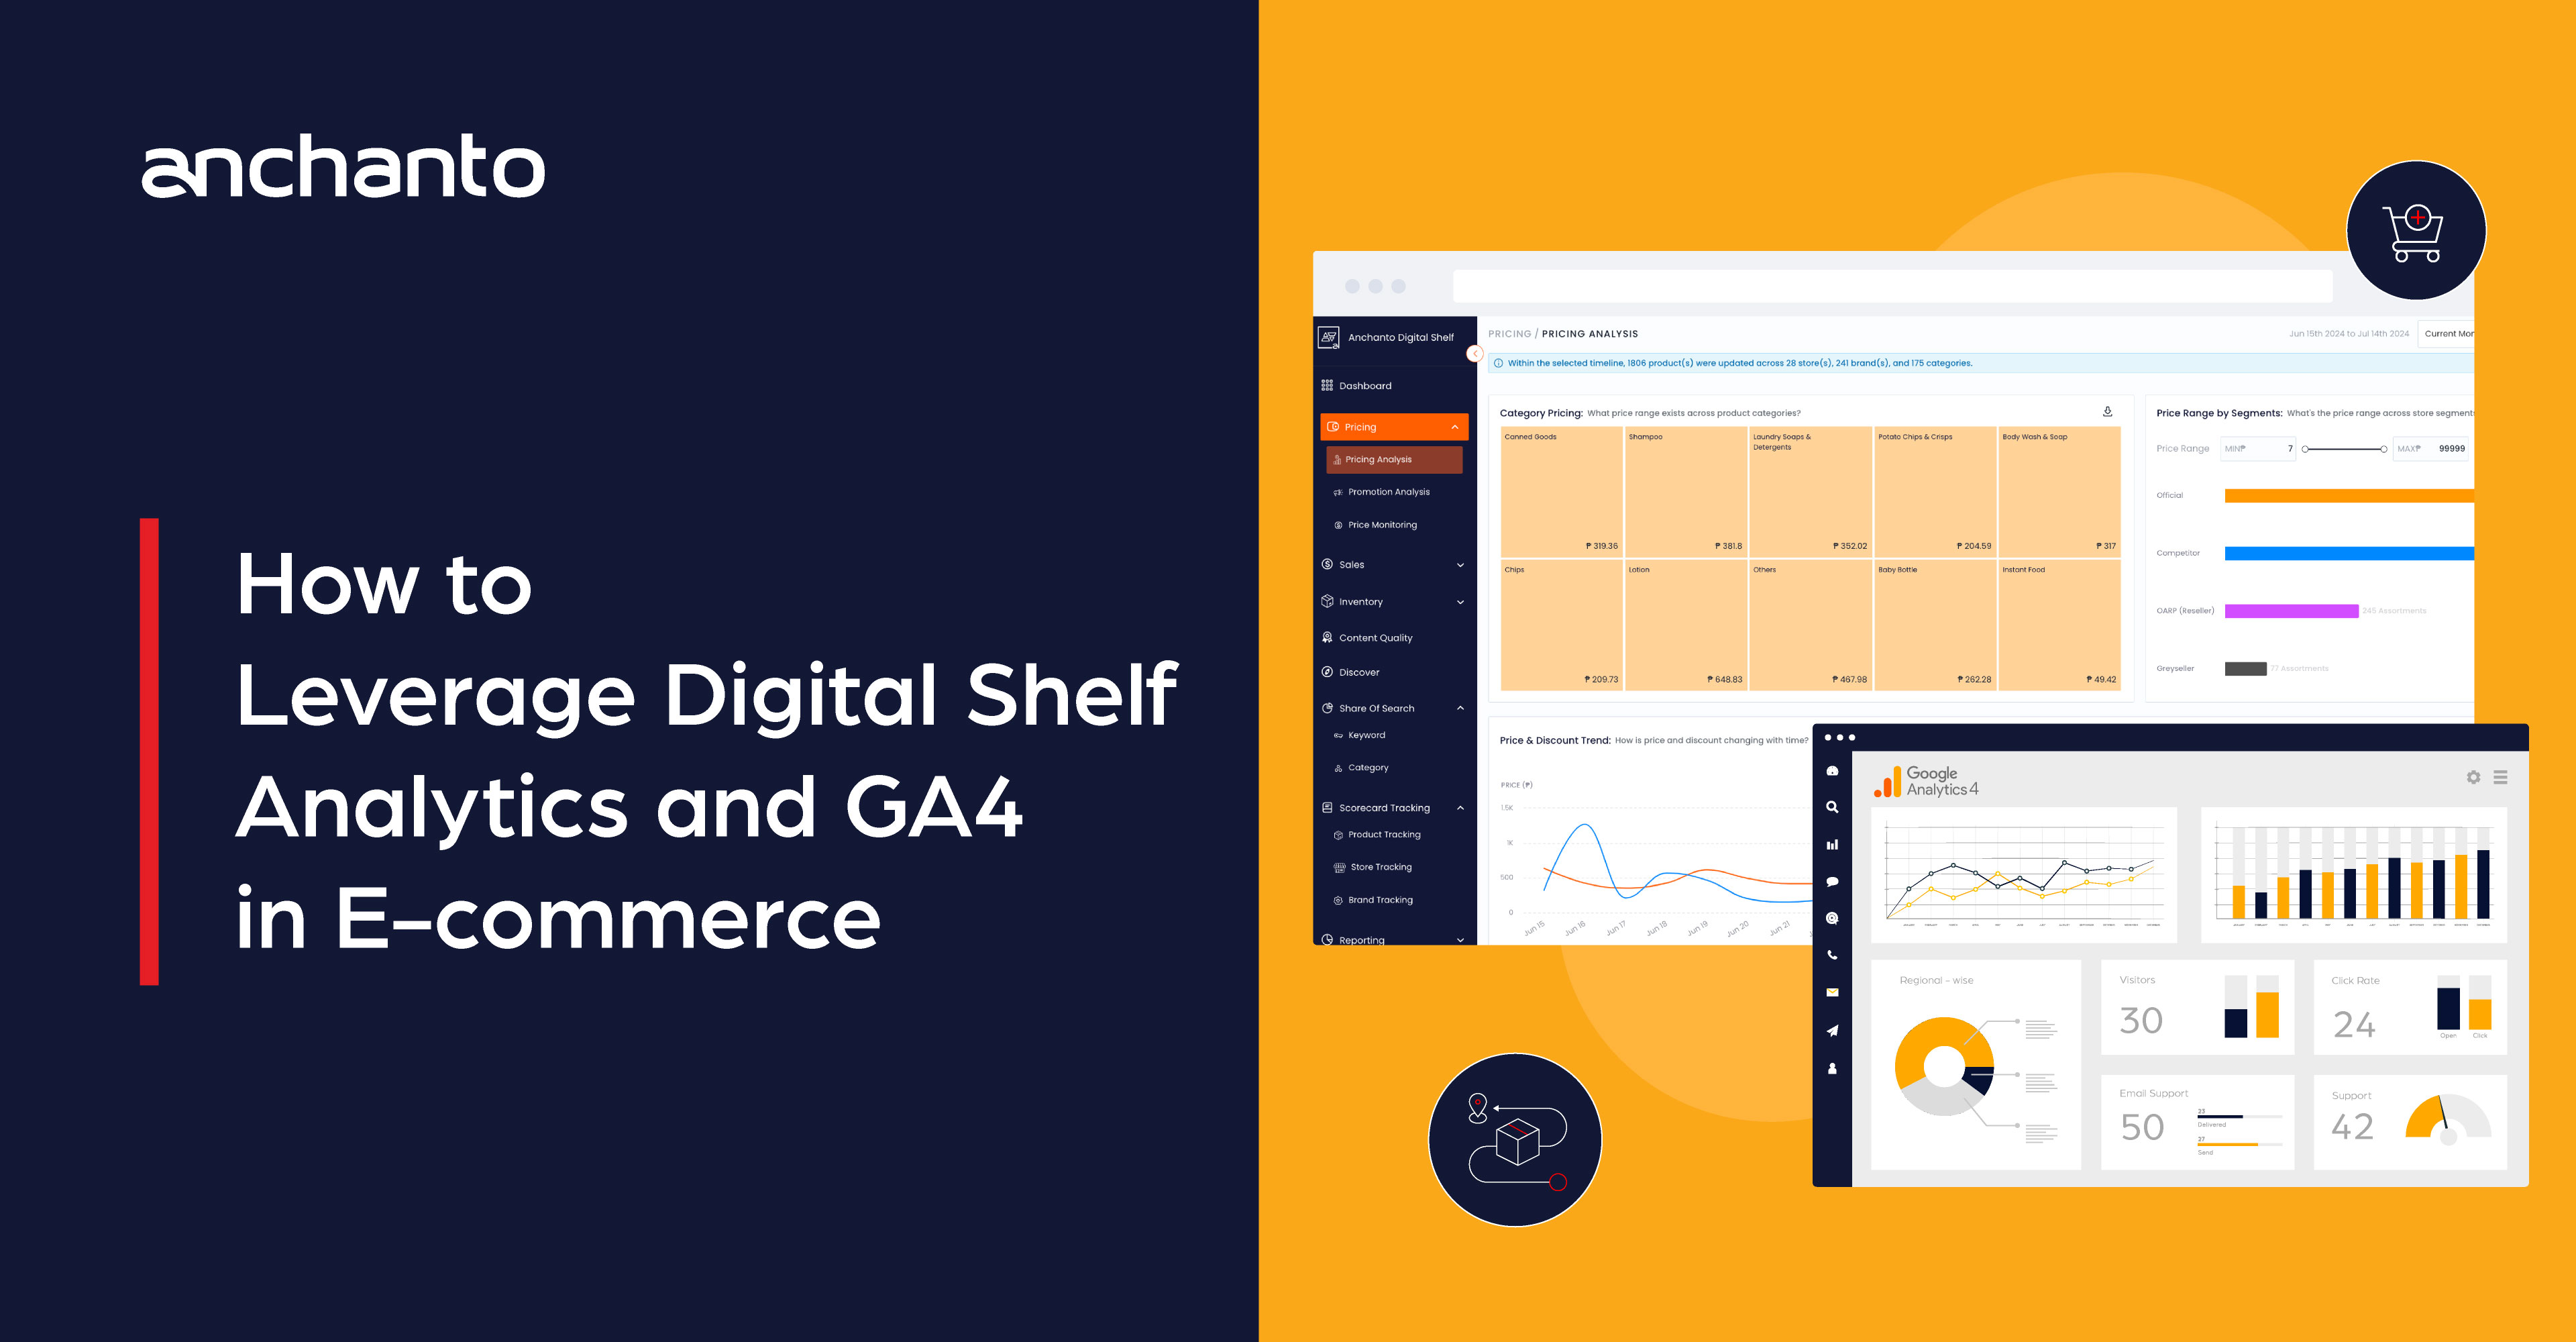 Why is Digital Shelf Analytics Essential in Addition to E-commerce Tracking by GA4 Analytics